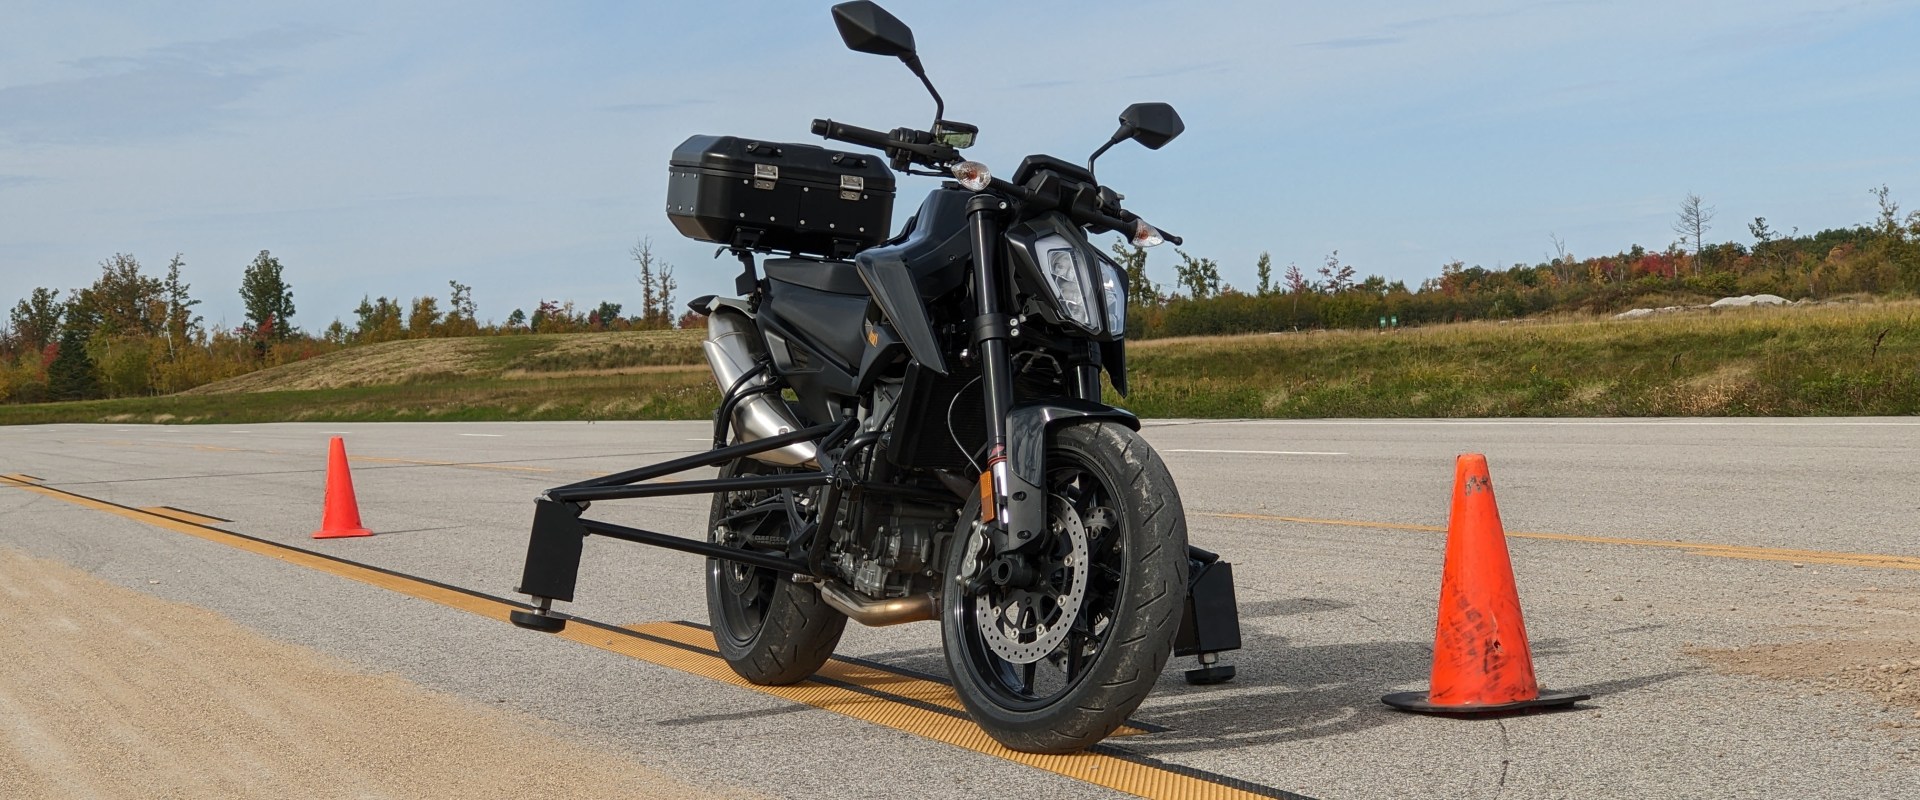 Understanding Blind Spots: A Guide to Motorcycle Safety & Road Awareness